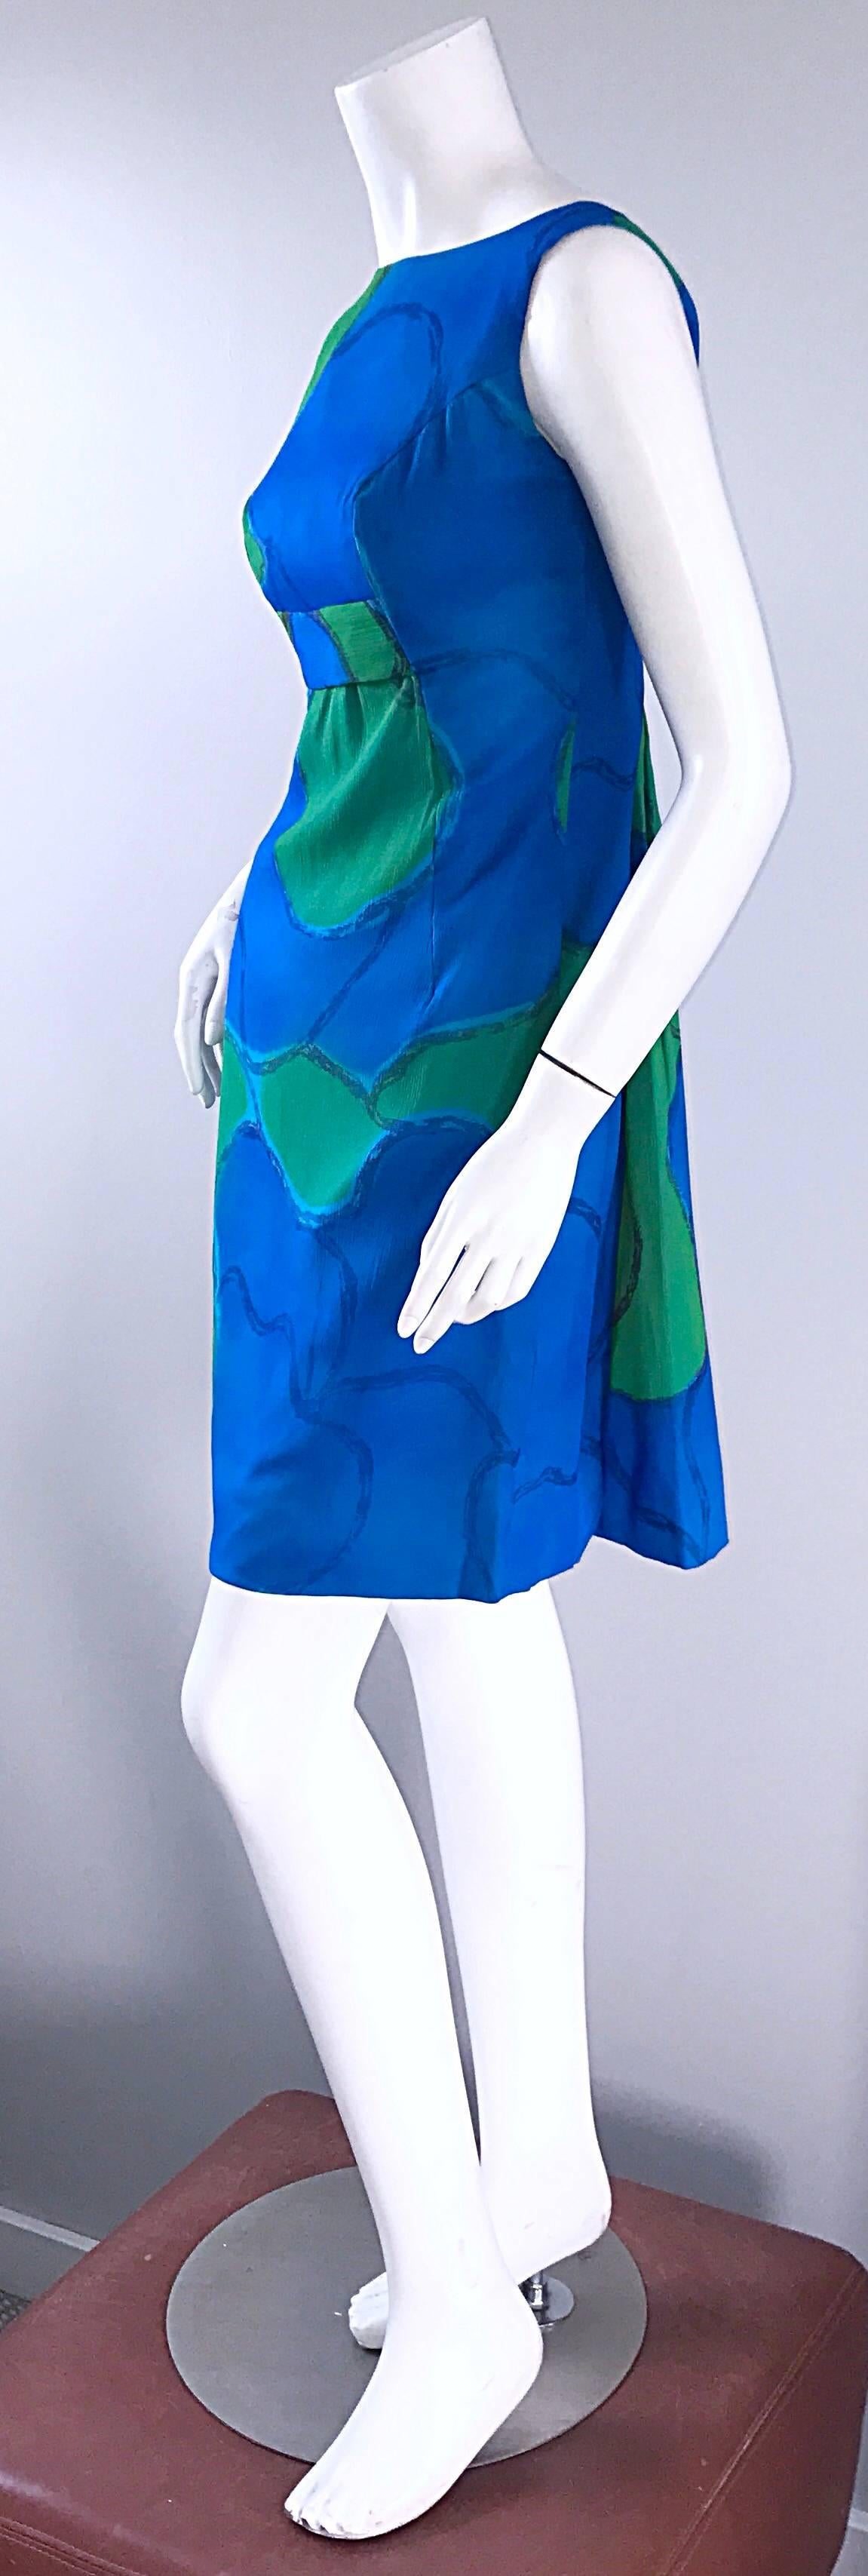 Chic 1960s Turquoise Blue and Green Watercolor Chiffon Demi Couture Shift Dress For Sale 4